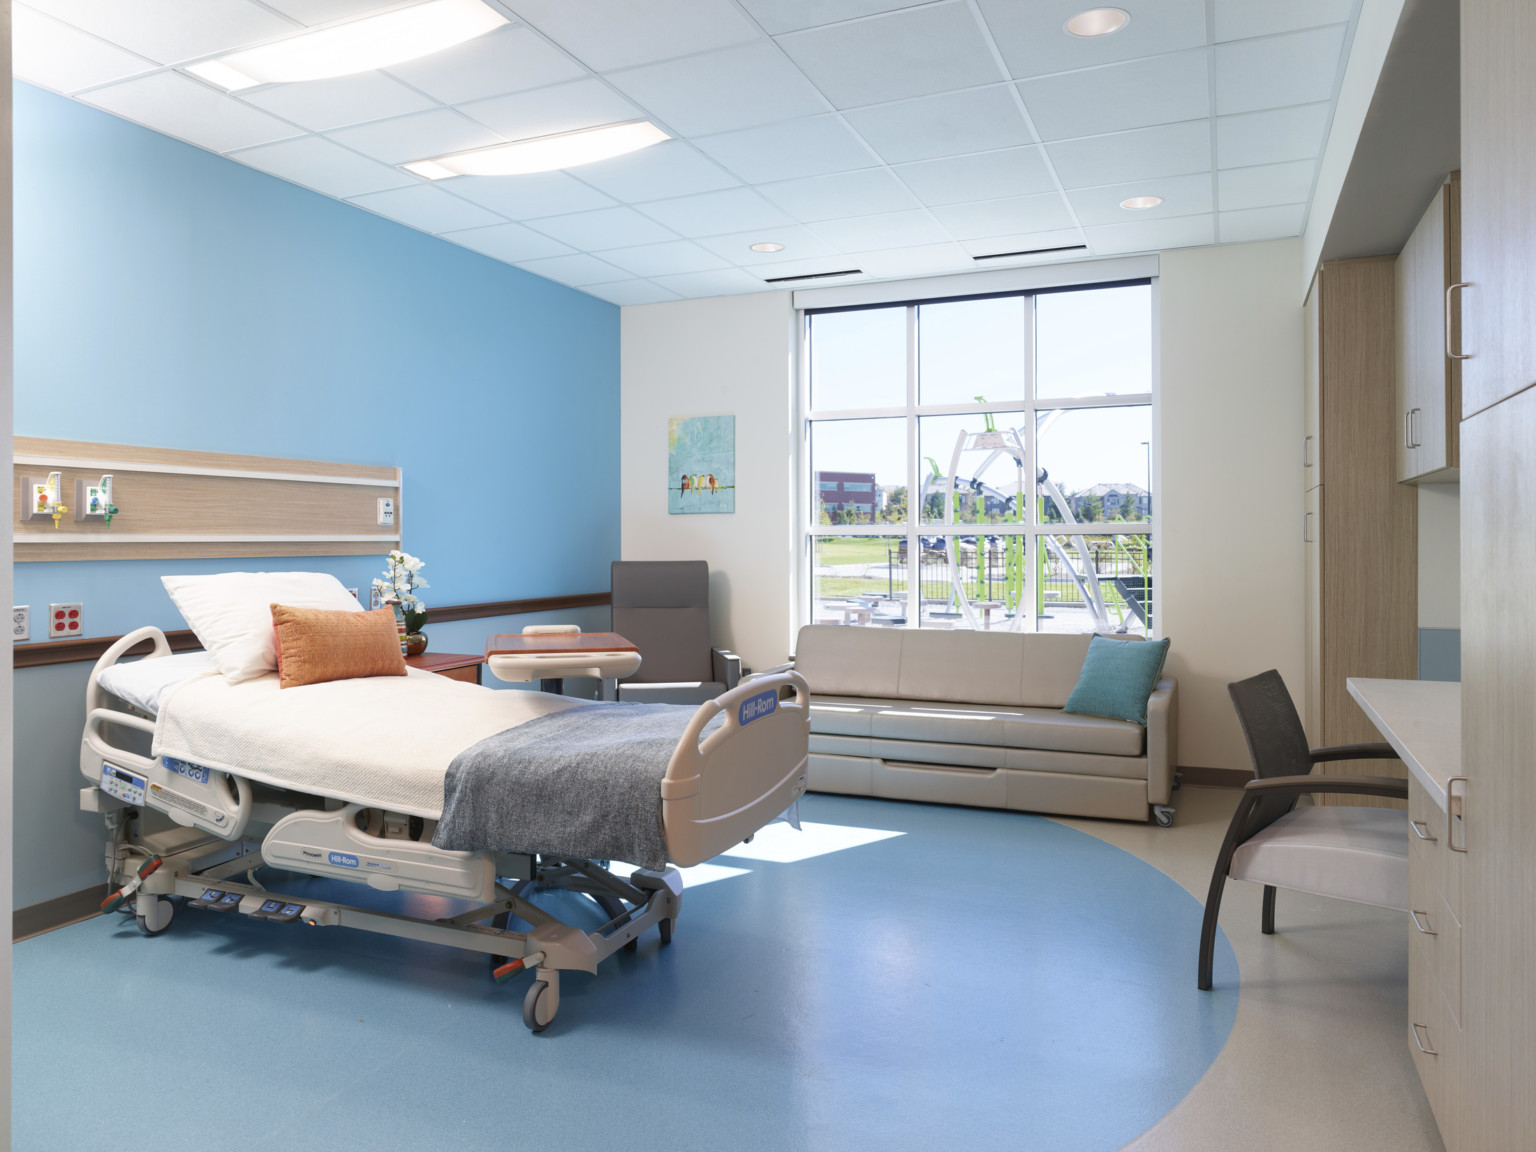 Hospital bed faces desk against blue wall connected to blue semi circle on grey floor. Couch faces bed in front of window